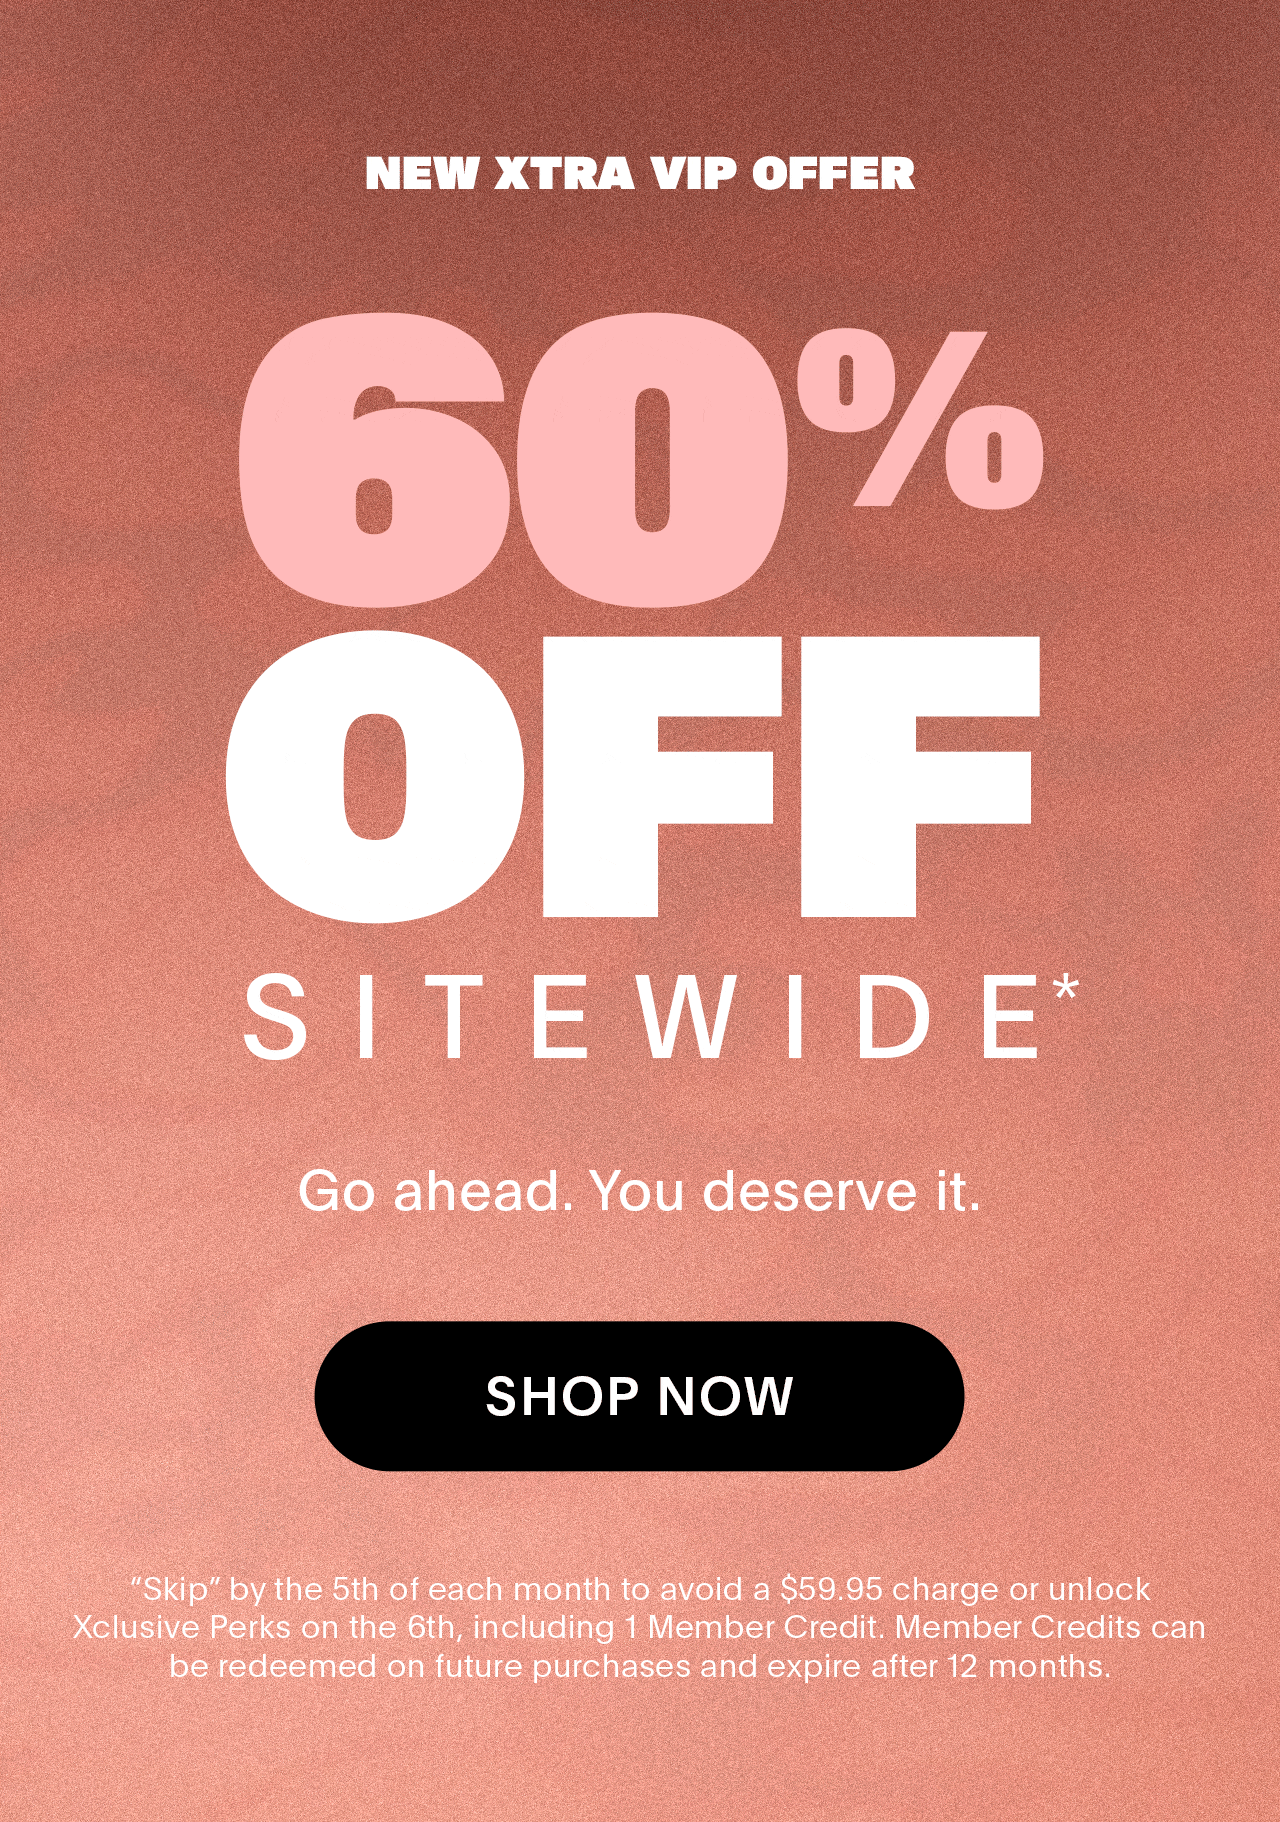 New Xtra VIP Offer\xa0 60% Off Sitewide*